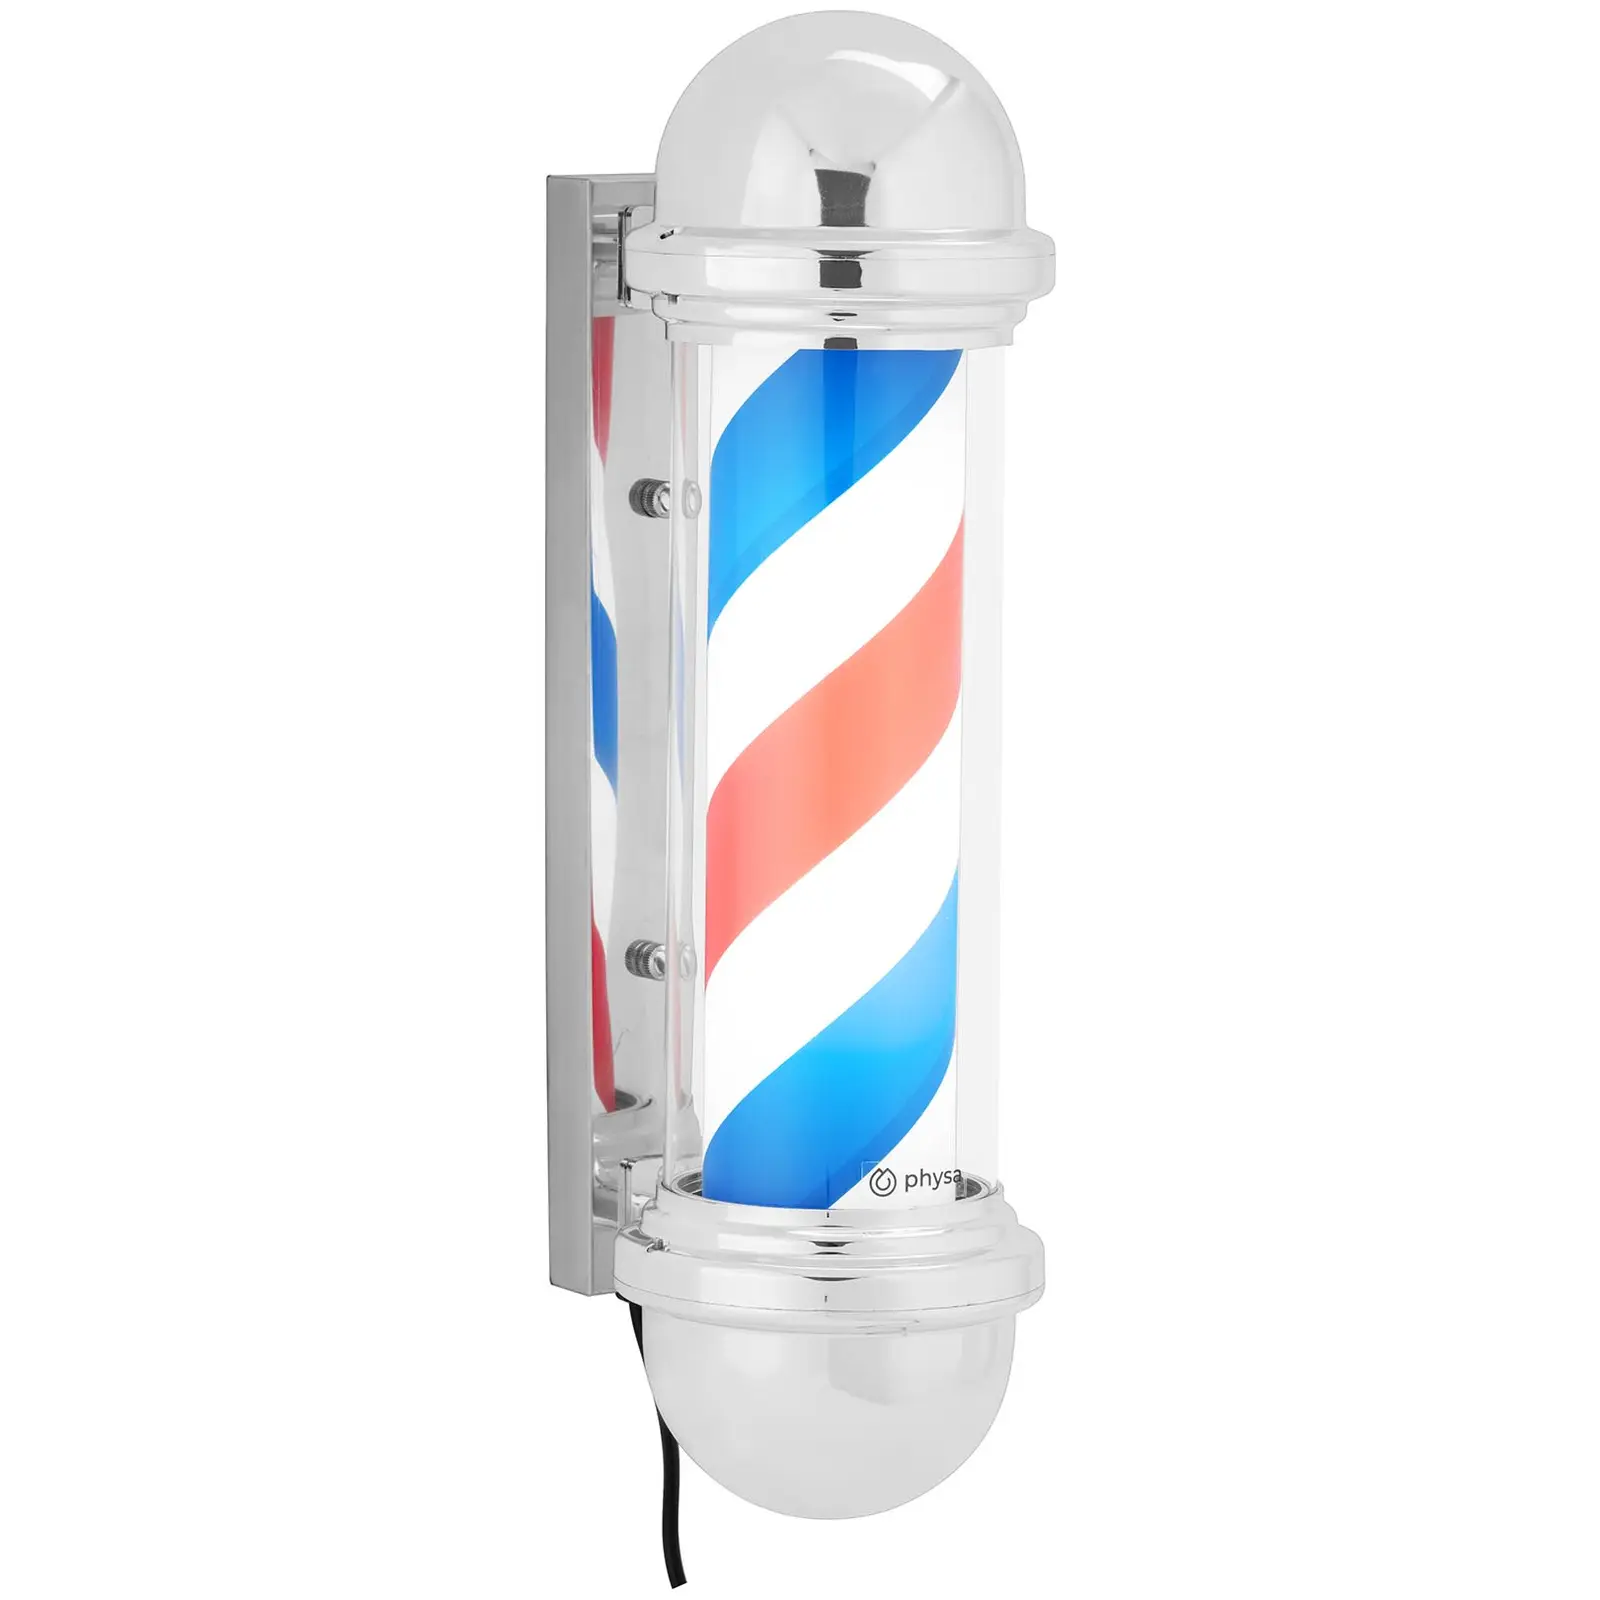 Barber Pole - rotates and illuminates - 300 mm height - 22 cm from the wall - silver frame